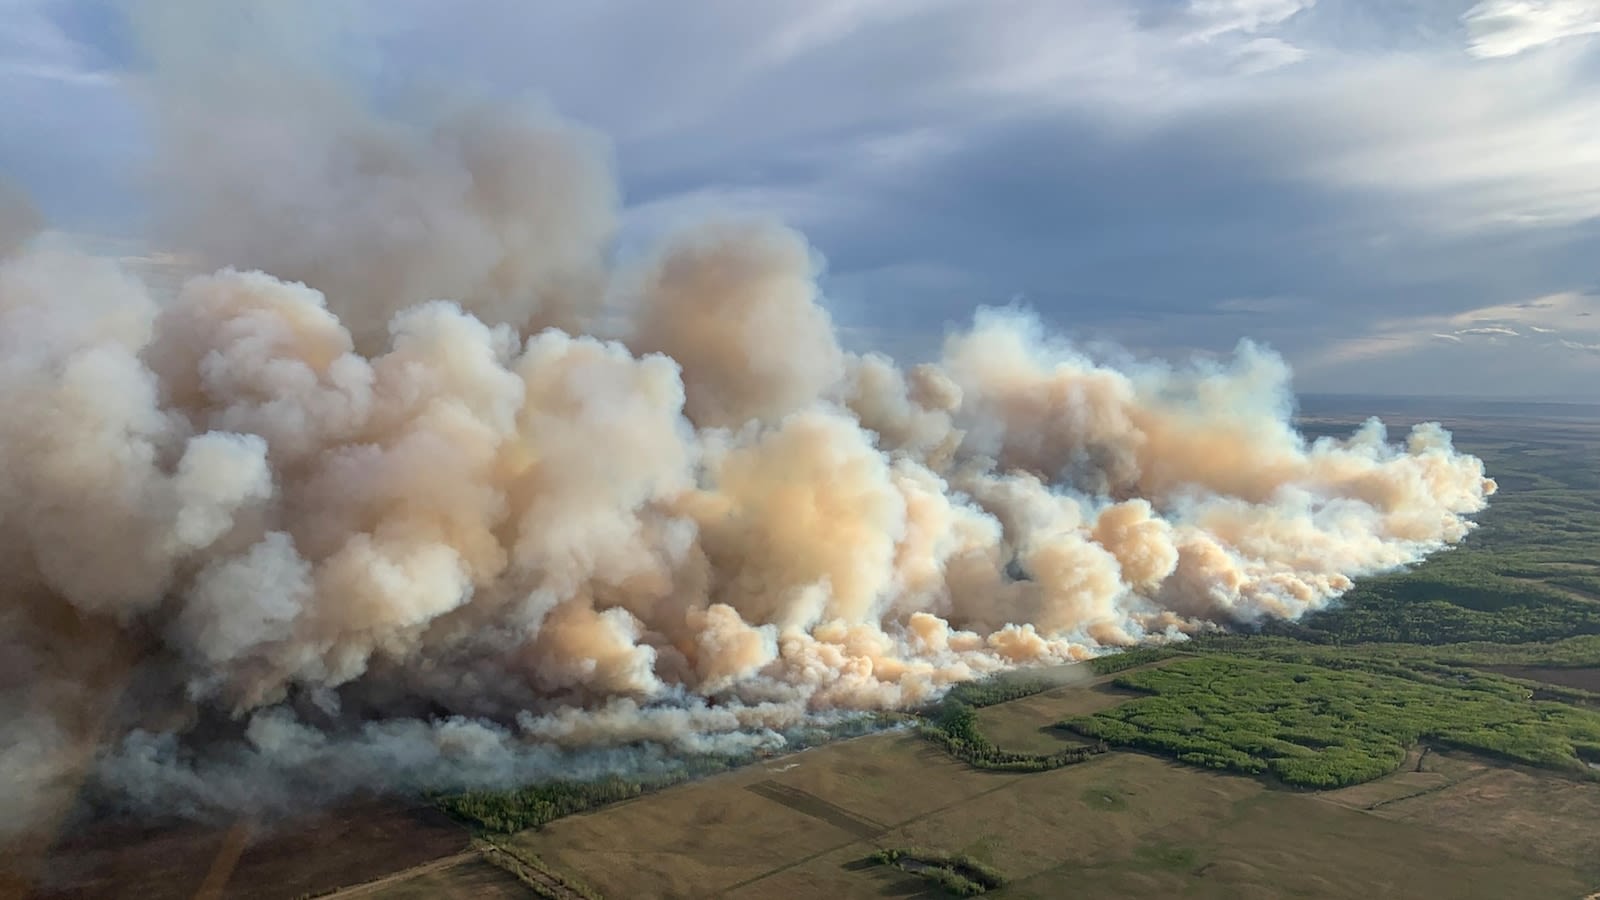 Wildfire smoke could impact US again as Canada braces for another fiery summer